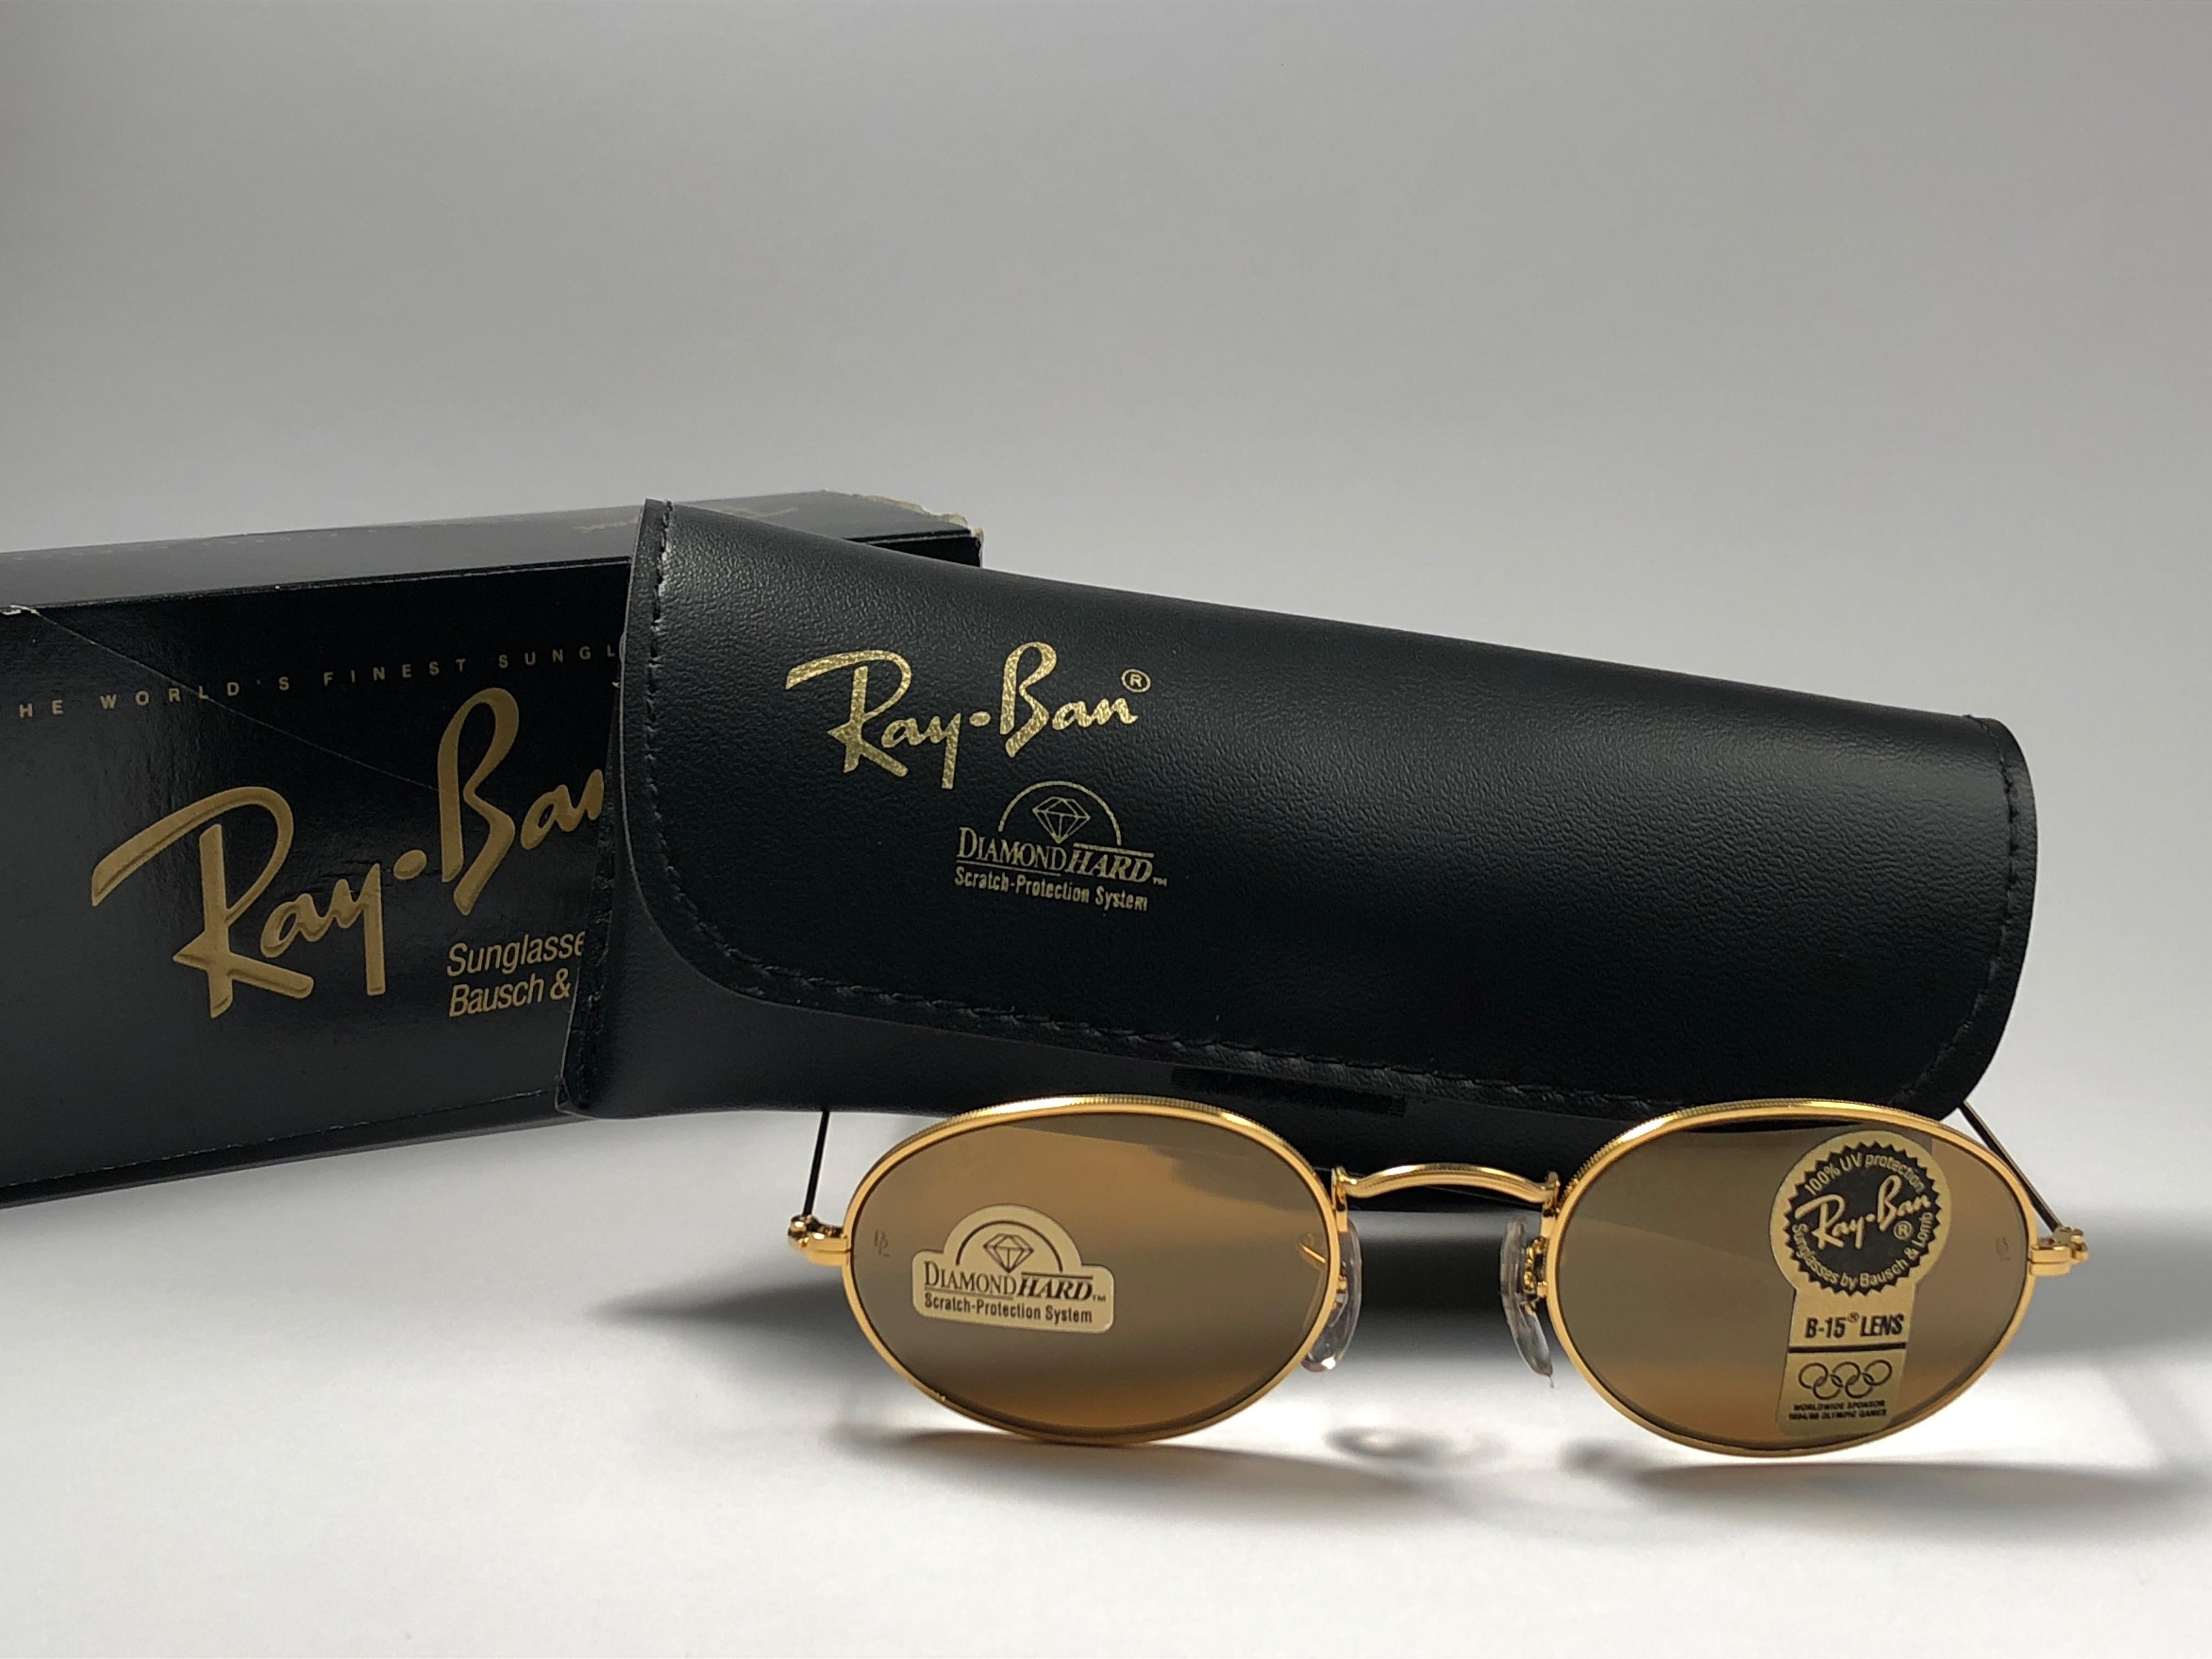 New Vintage Ray Ban Oval Gold frame holding a pair of rare Ray Ban B&L Diamond Hard lenses with logo. Comes with its original Ray Ban B&L case, booklet, carton box and cleaning cloth.
This piece may show minor sign of wear due to storage.  
A seldom